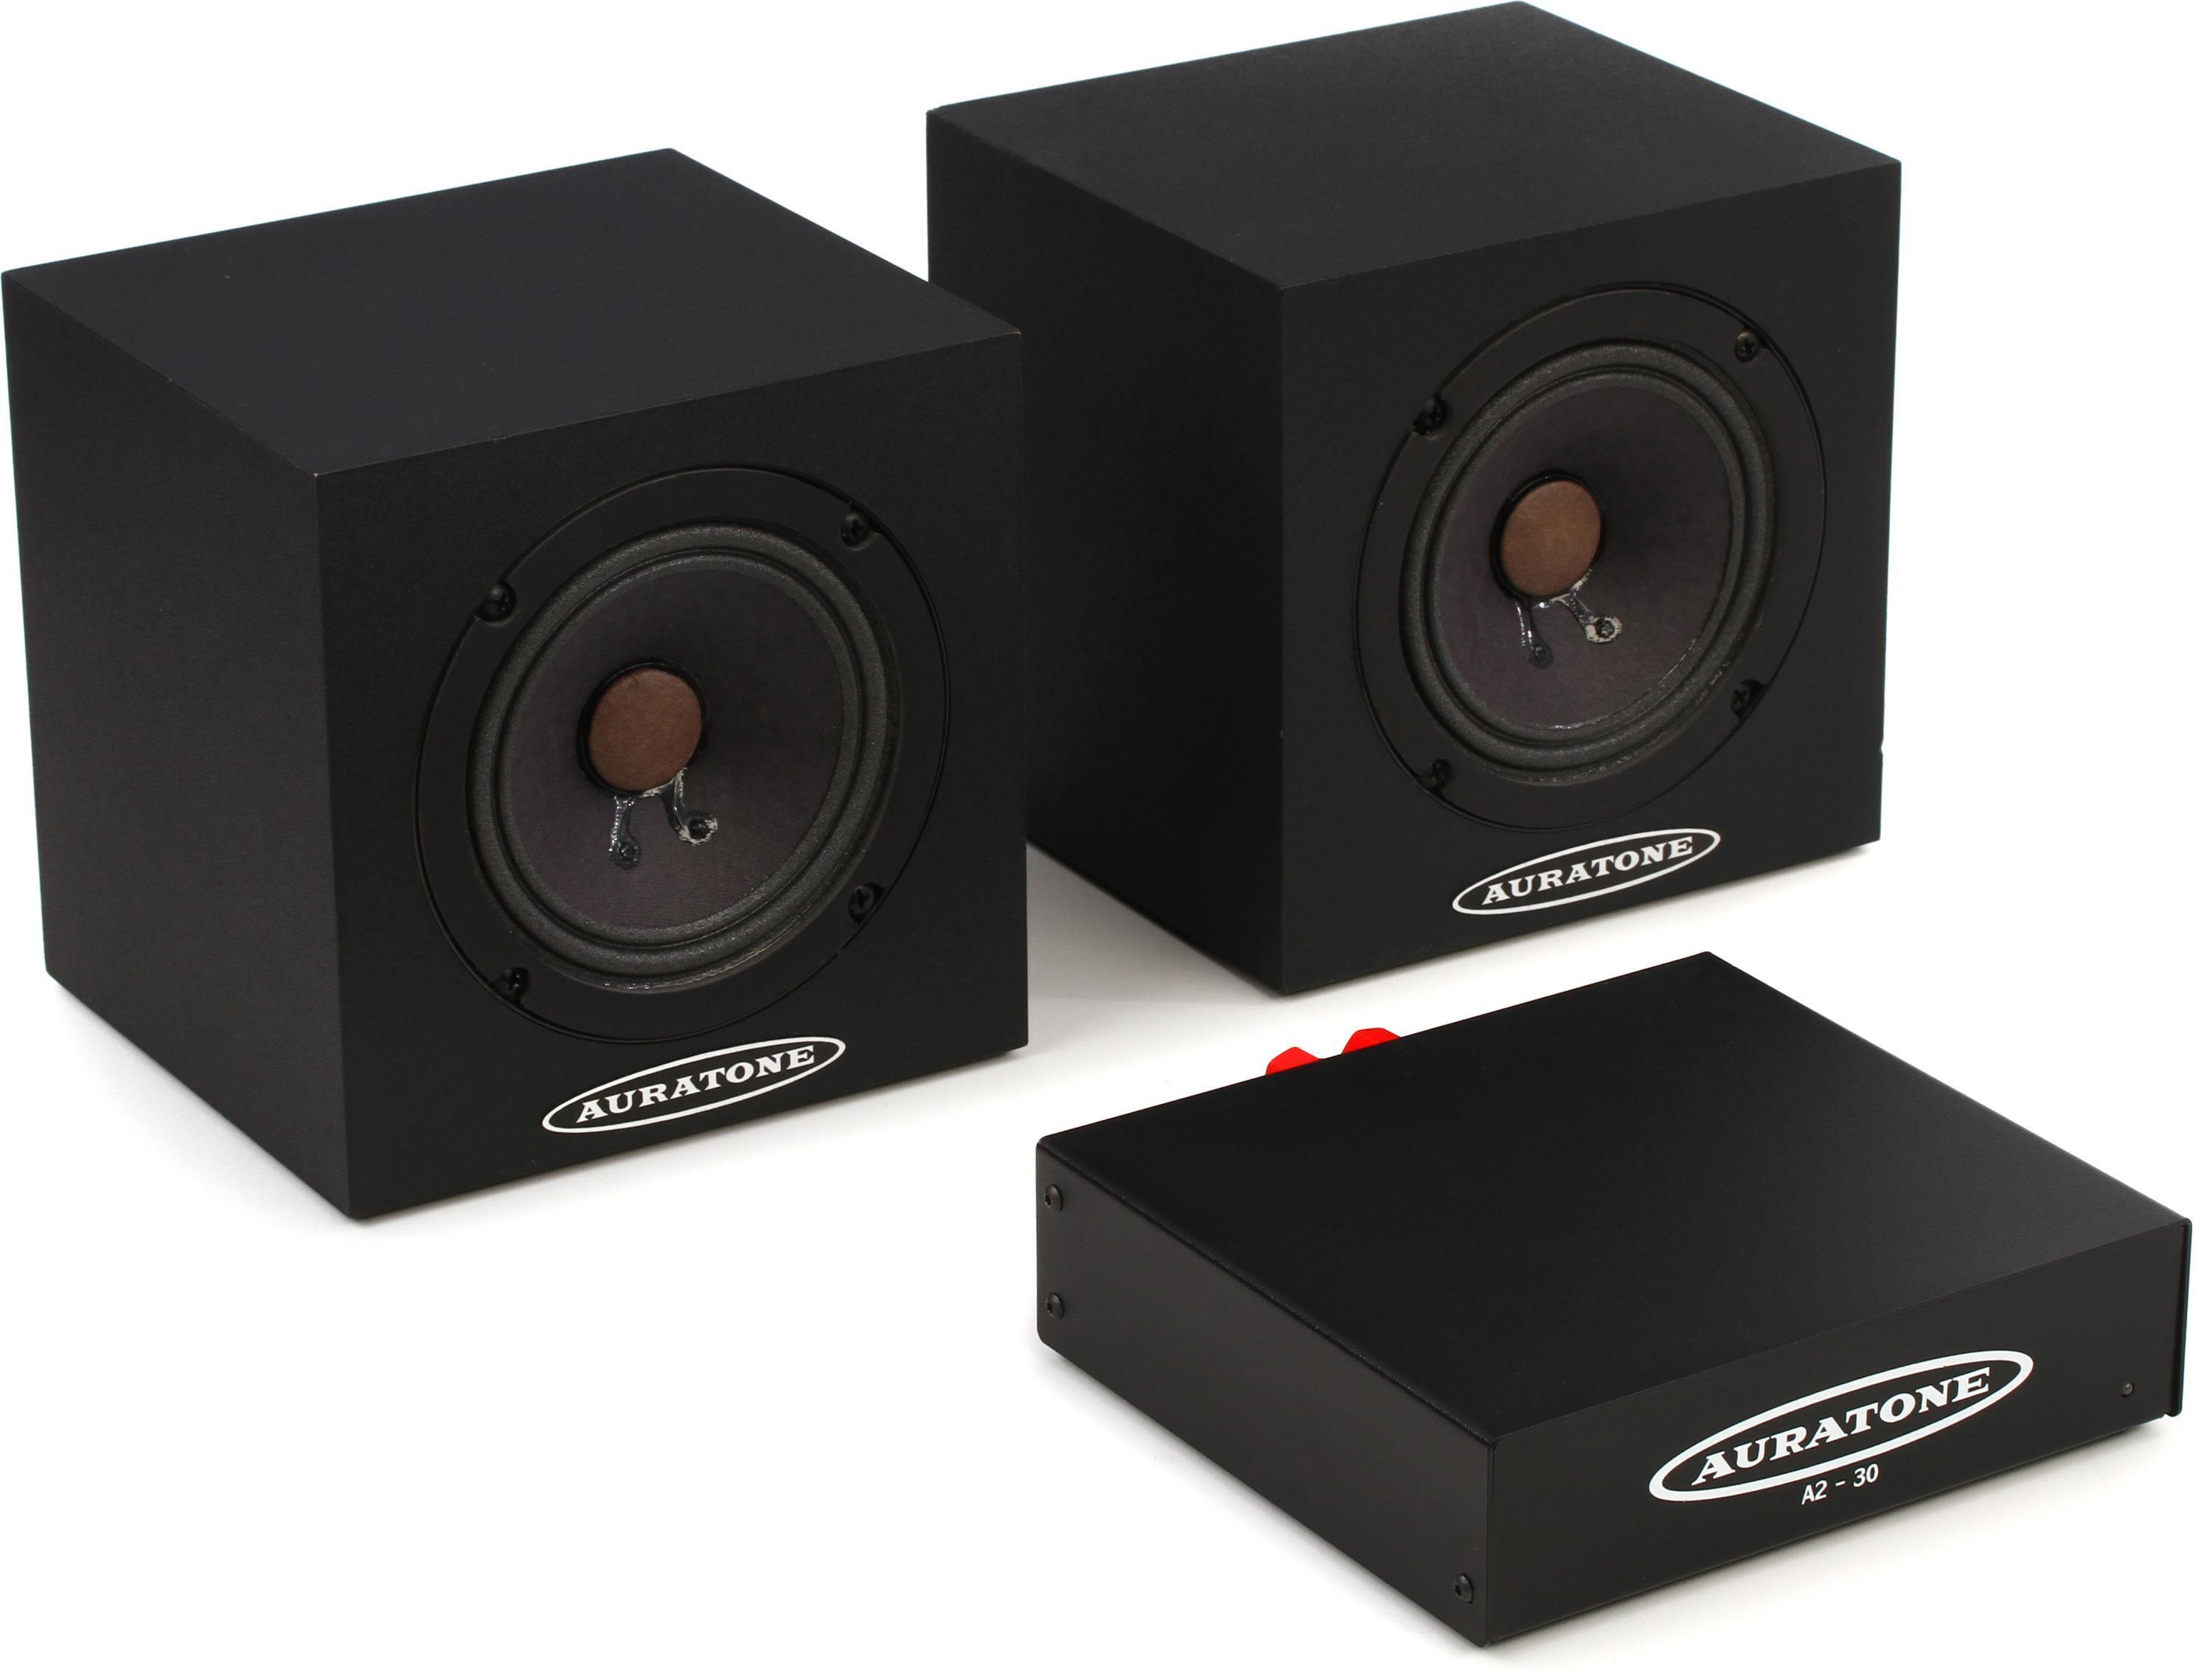 Auratone 5C Super Sound Cubes 4.5 inch Passive Reference Monitors with  A2-30 Power Amp - Black